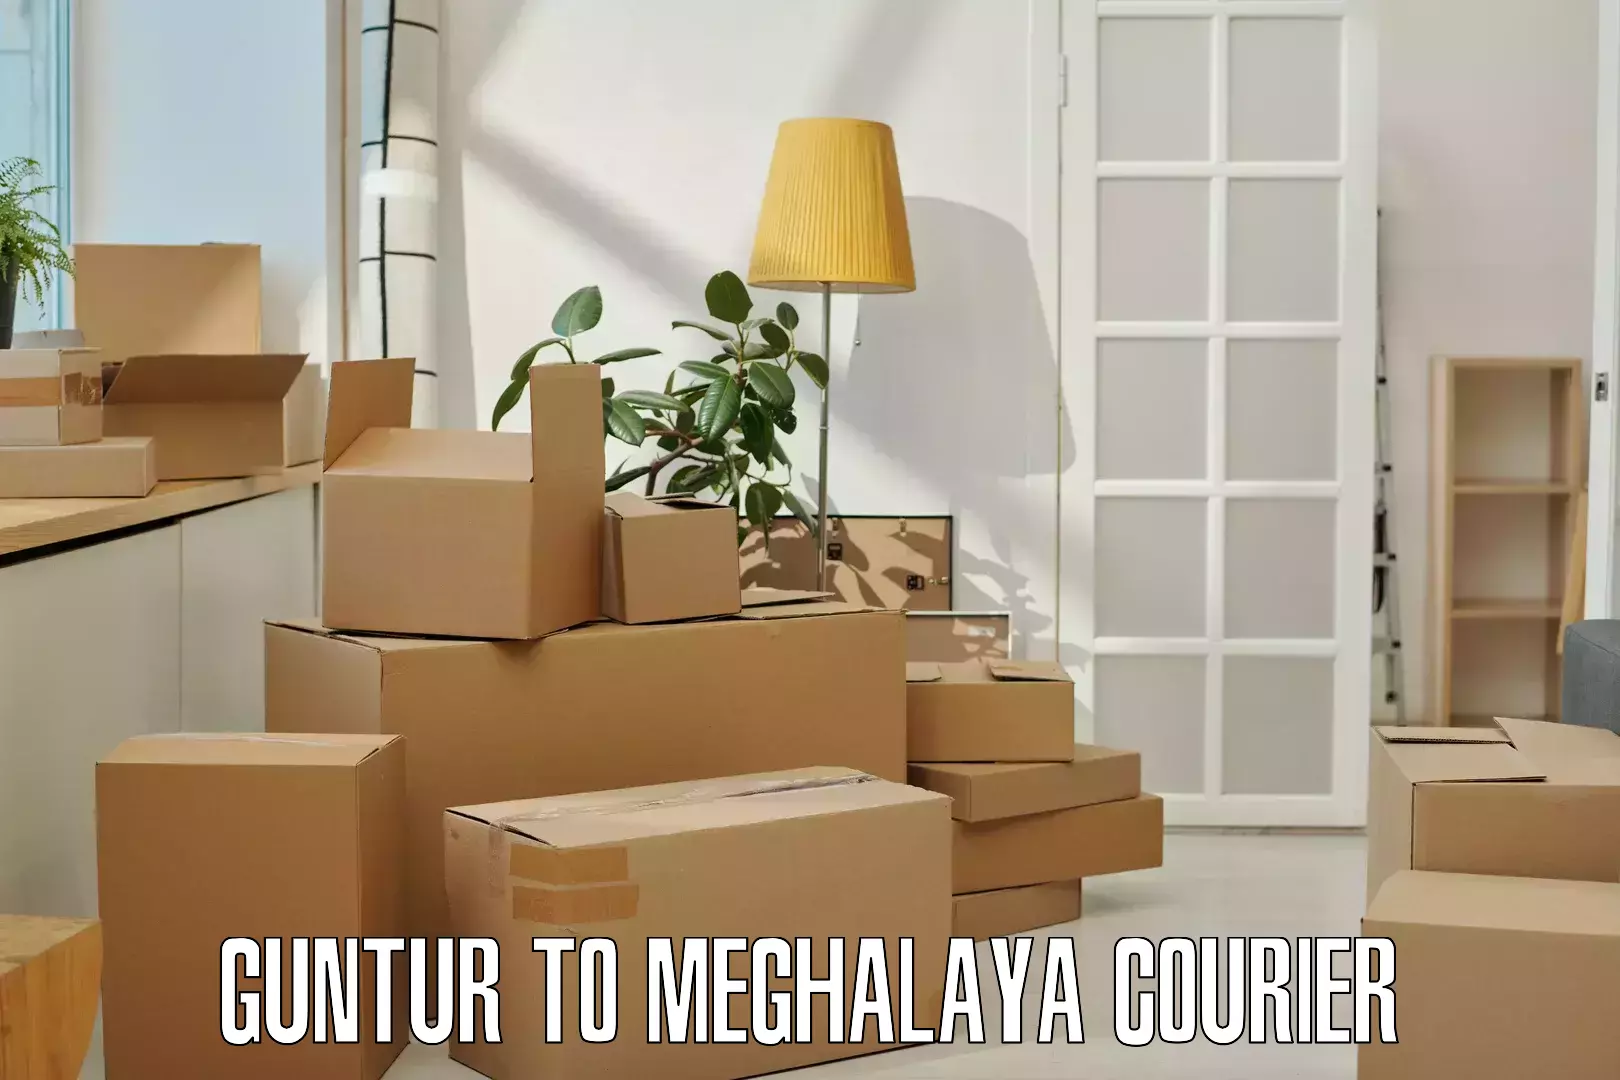 Full-service courier options Guntur to Shillong